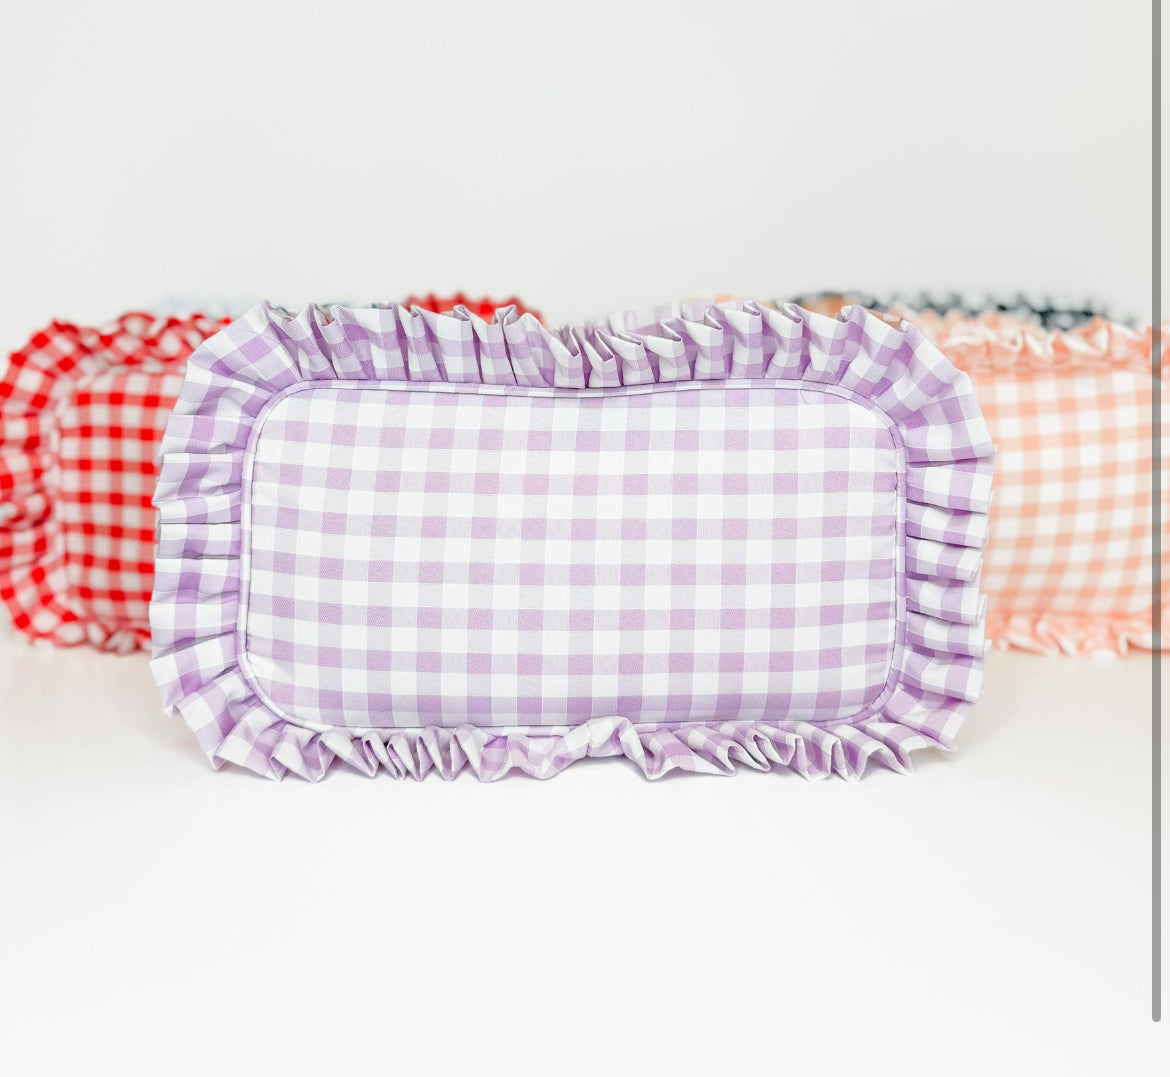 Gingham Frilly Bags - multiple colors